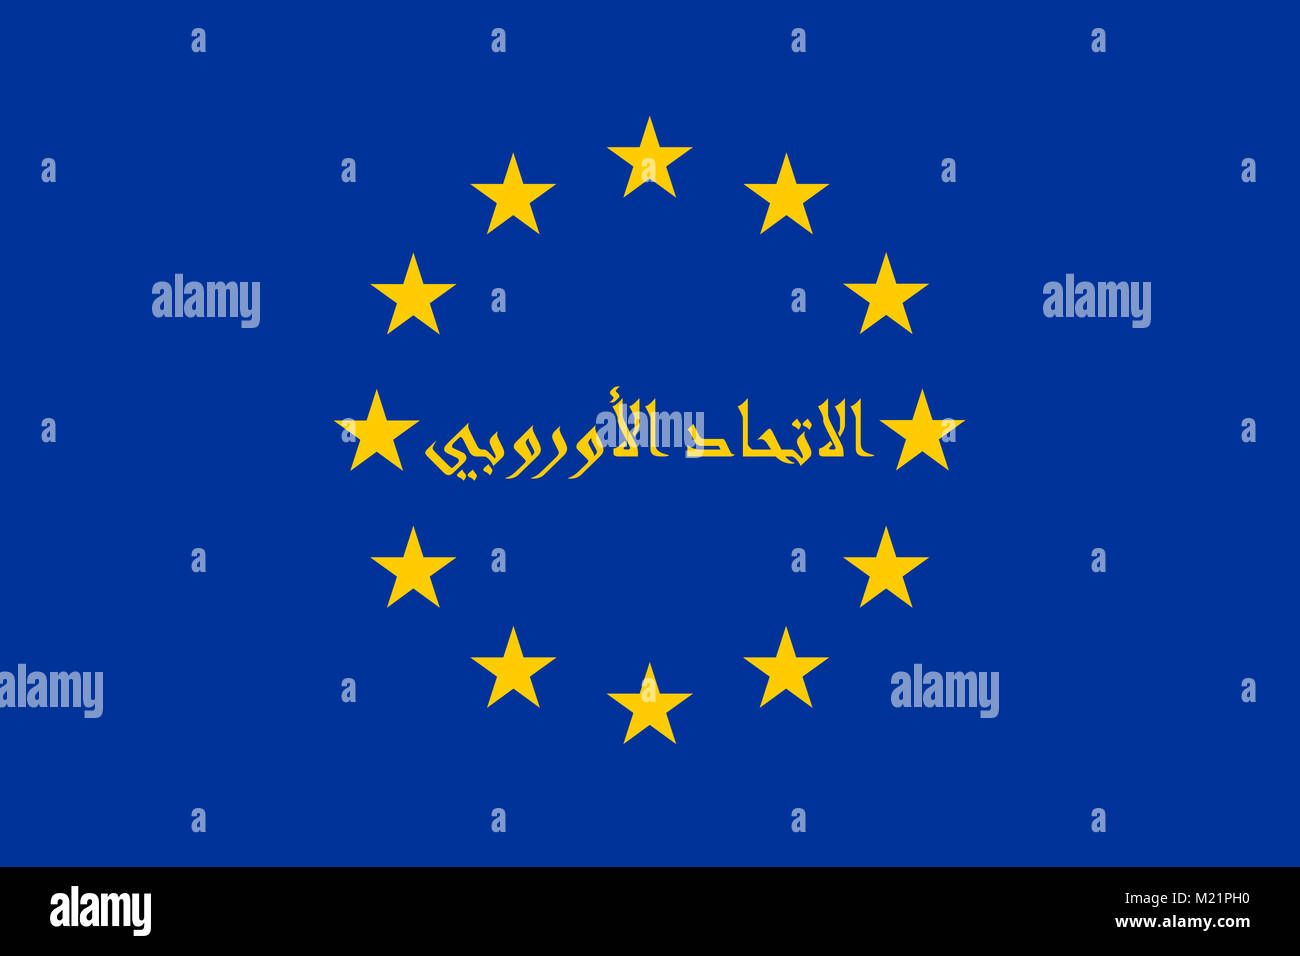 Flag of EU with Arabic ligature inscription, which means: 'European Union'. Illustration of political neologism Eurabia. Stock Photo